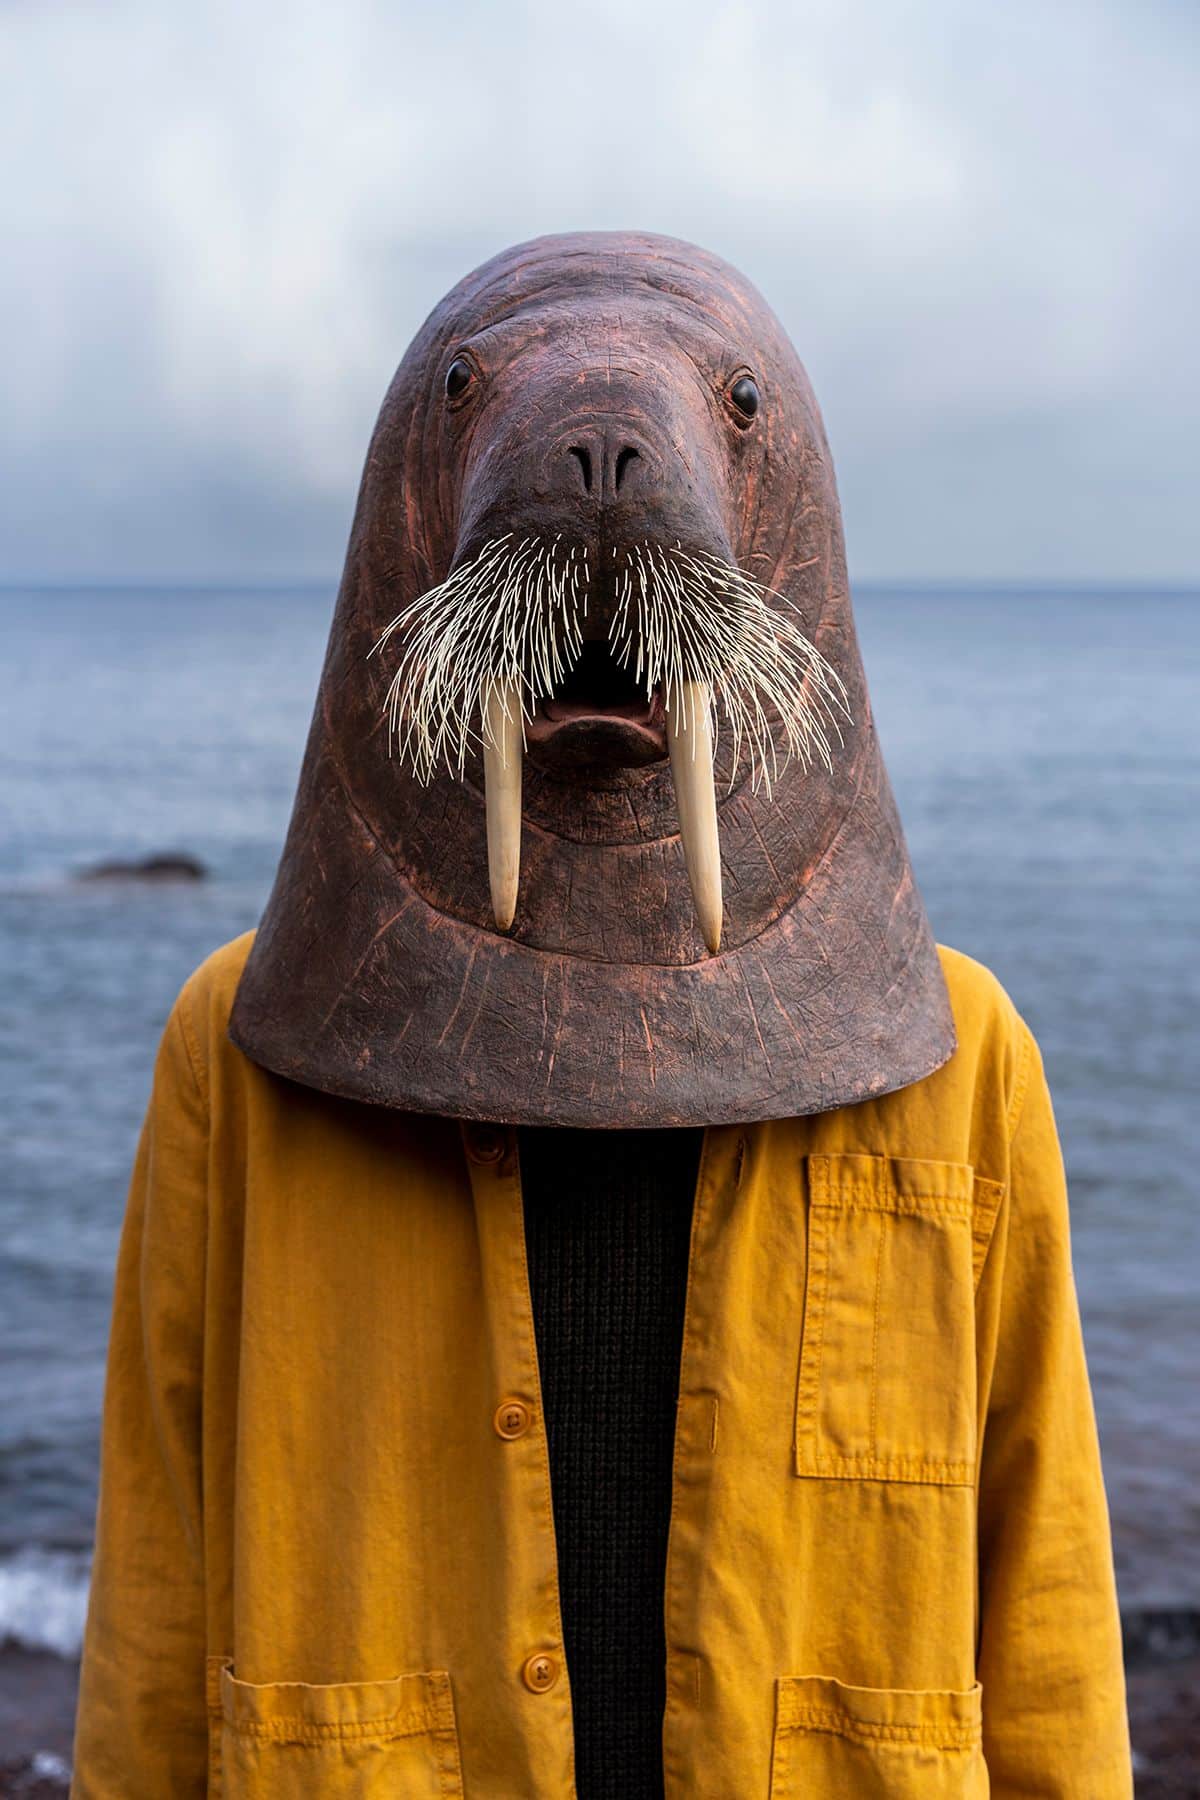 A close up photo of a person in a yellow coat wearing a walrus head over their head